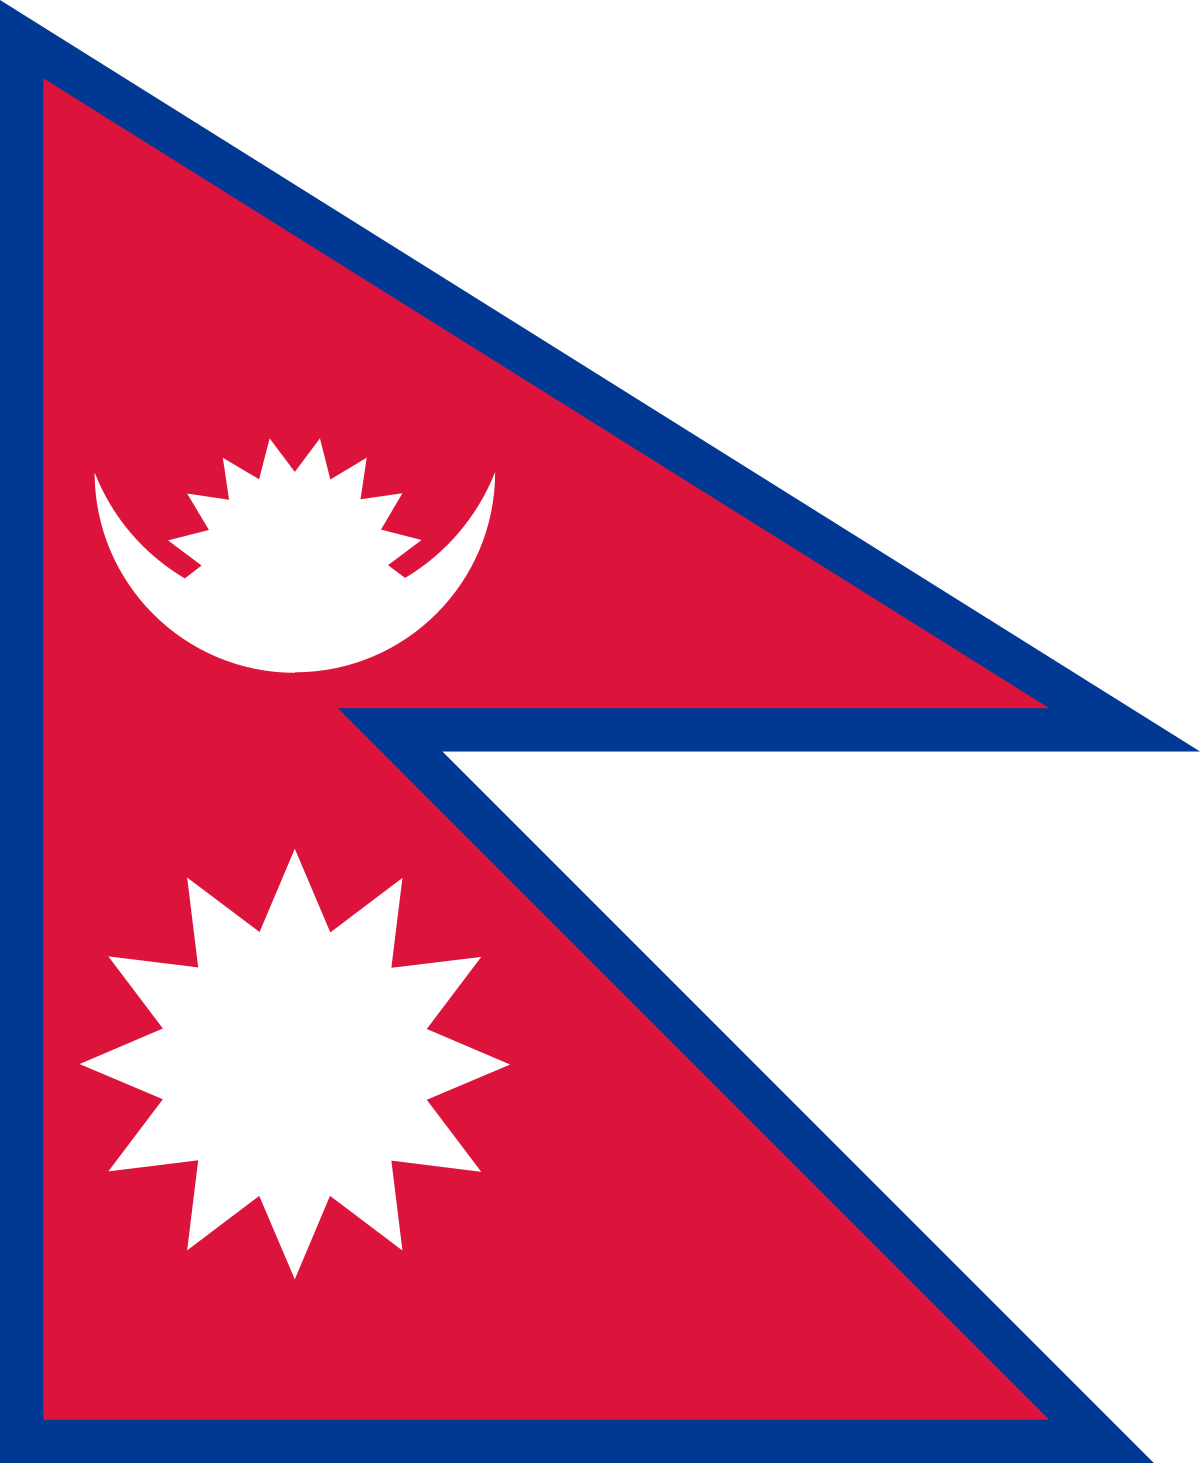 3 People in Blue Square Logo - Flag of Nepal